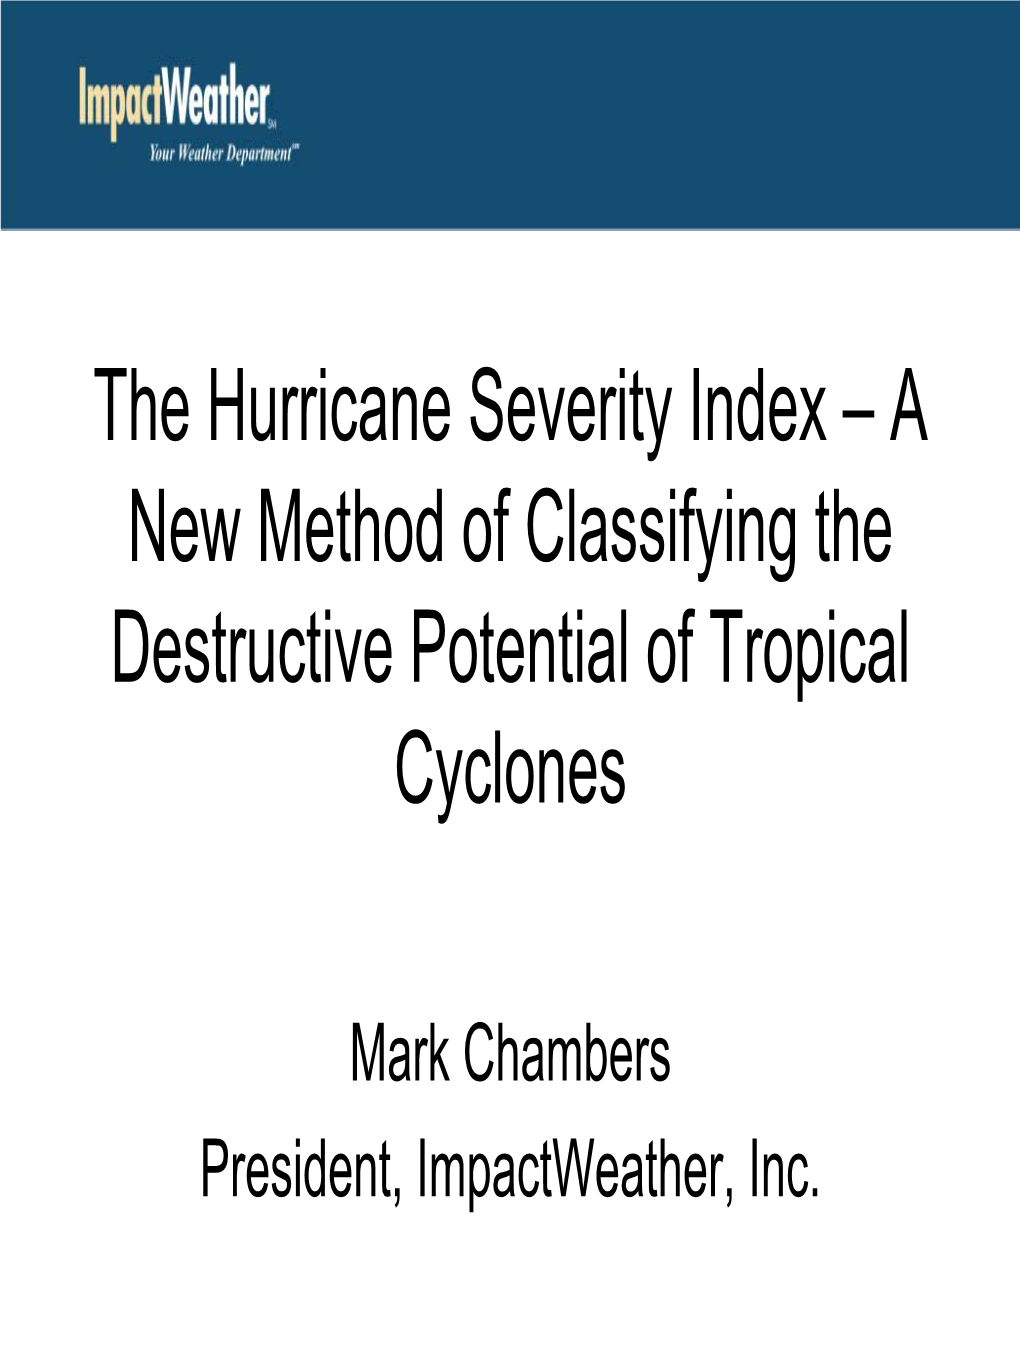 The Hurricane Severity Index – a New Method of Classifying the Destructive Potential of Tropical Cyclones